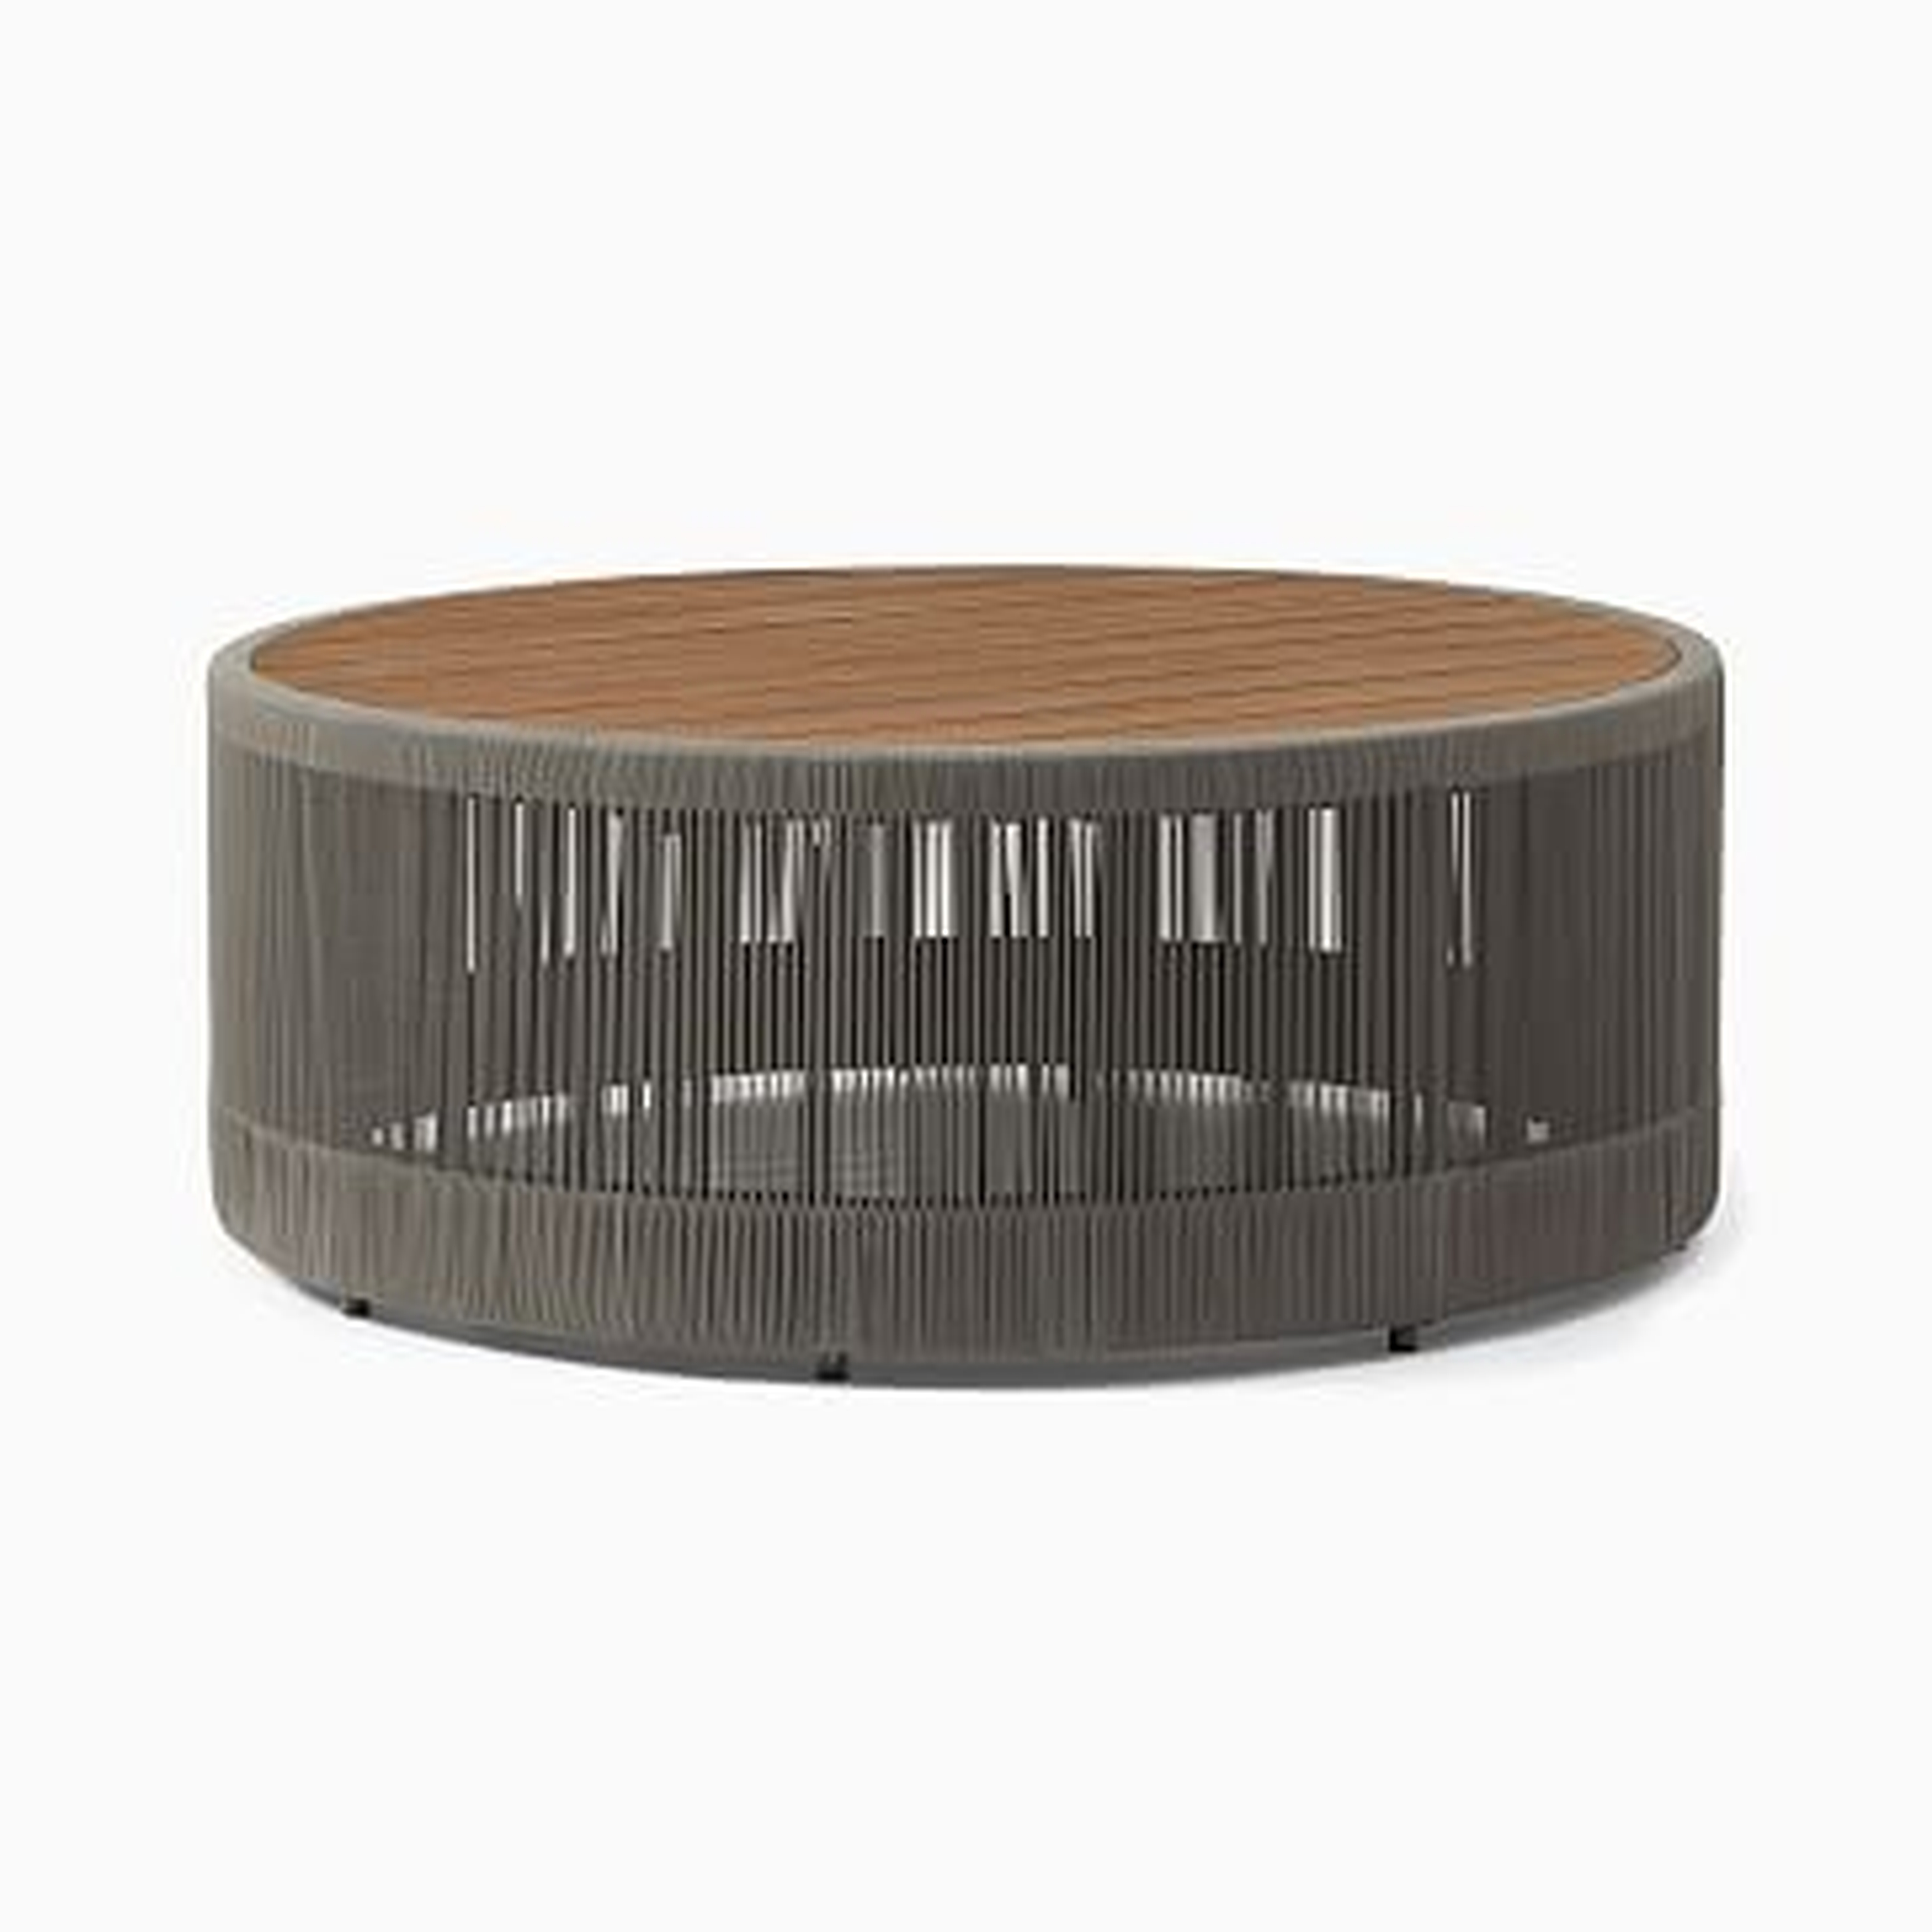 Porto Outdoor 44 in Round Coffee Table, Driftwood - West Elm